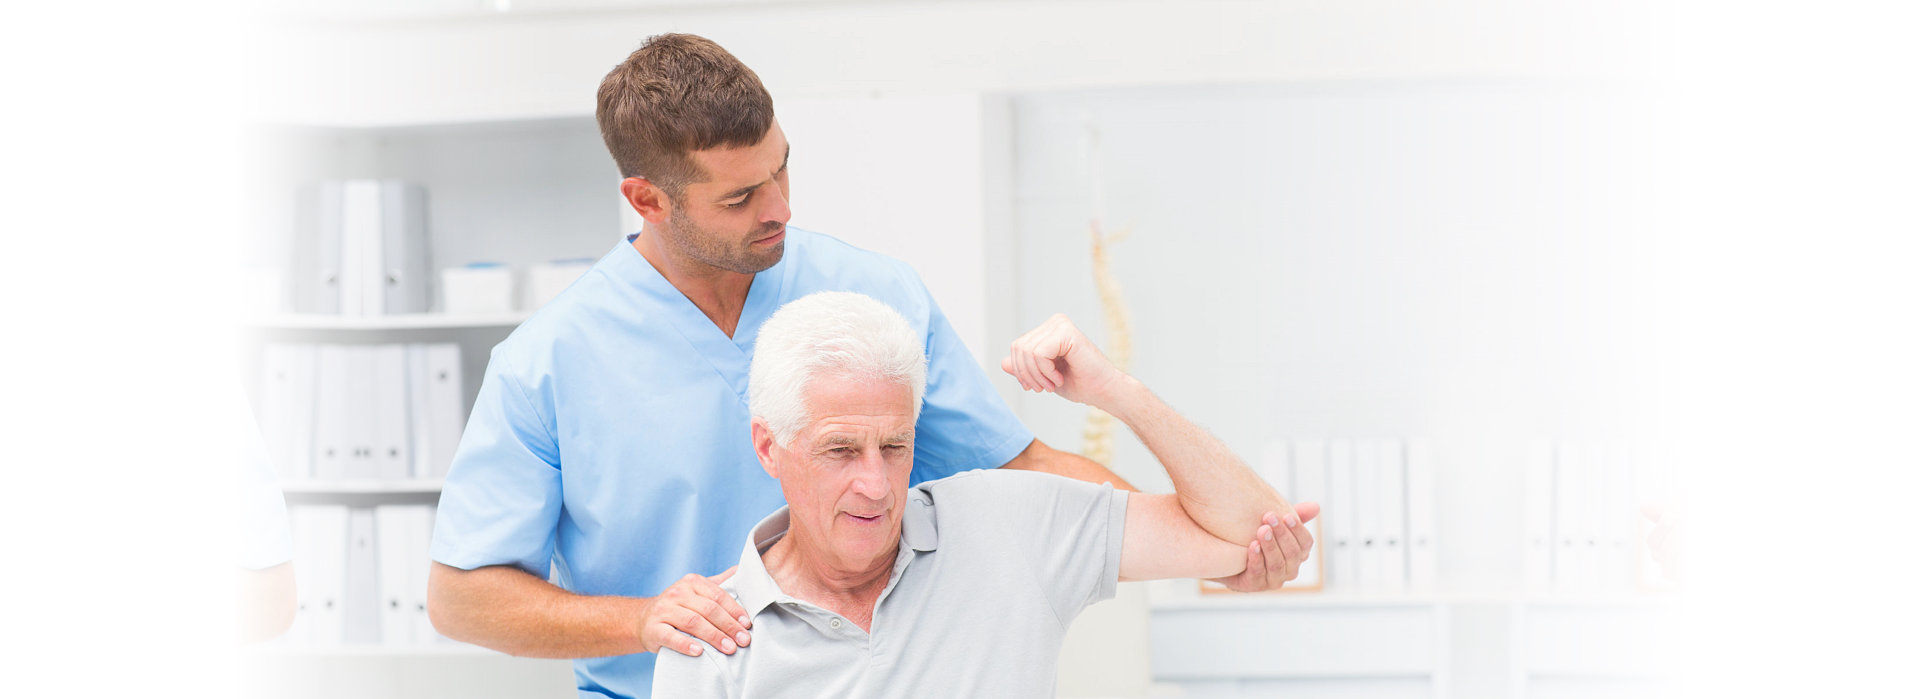 caregiver assisting patient in lifting his arm